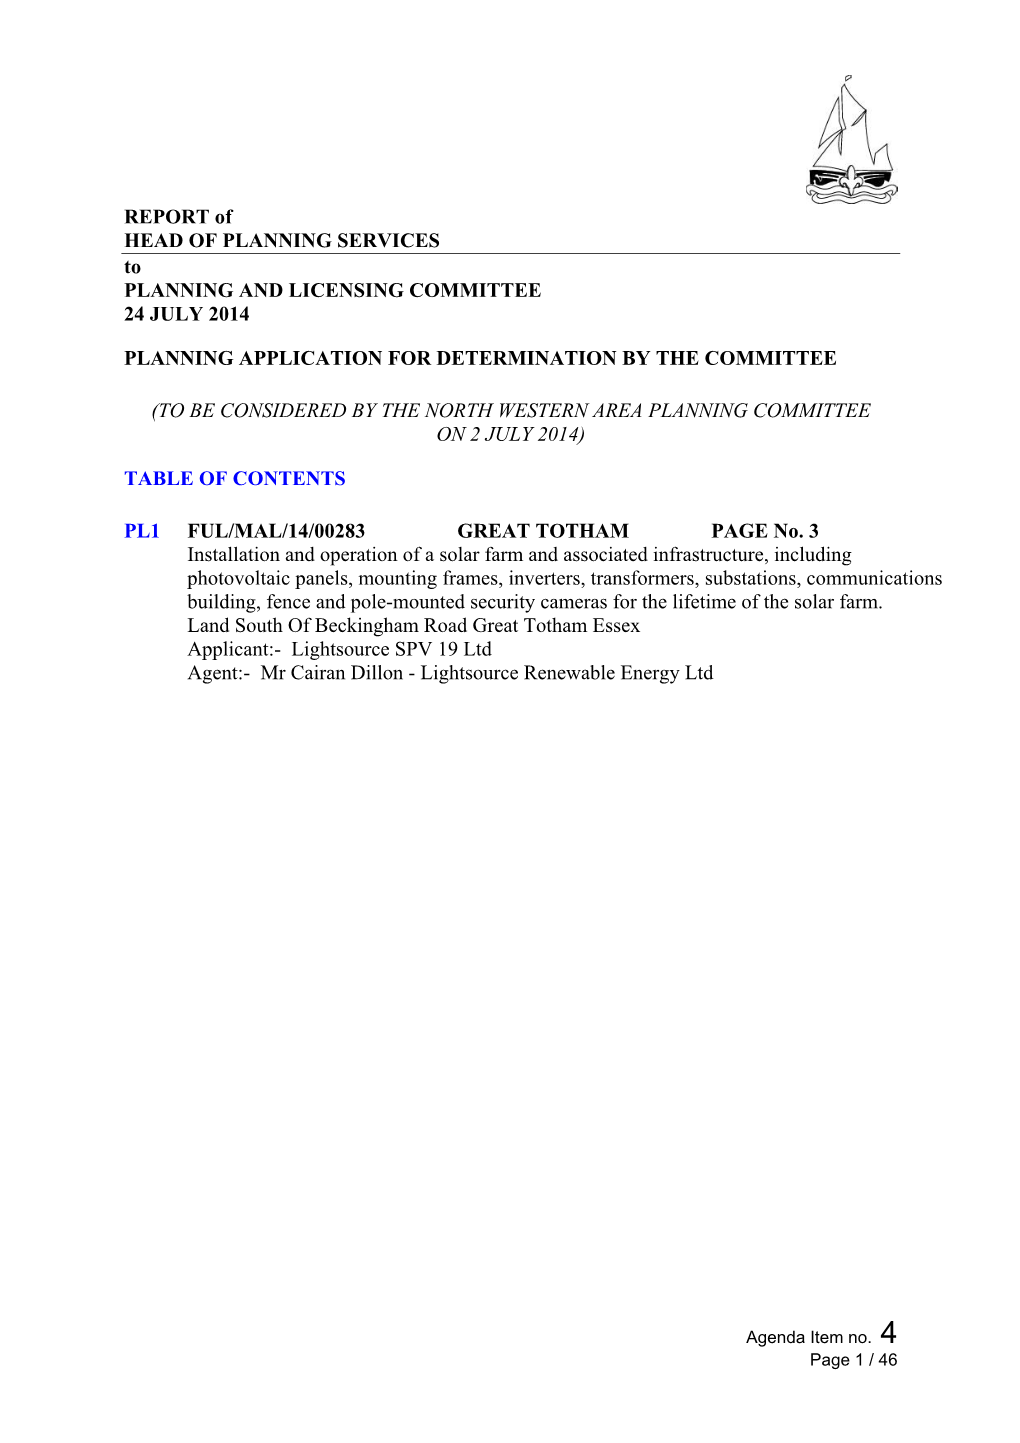 REPORT of HEAD of PLANNING SERVICES to PLANNING and LICENSING COMMITTEE 24 JULY 2014